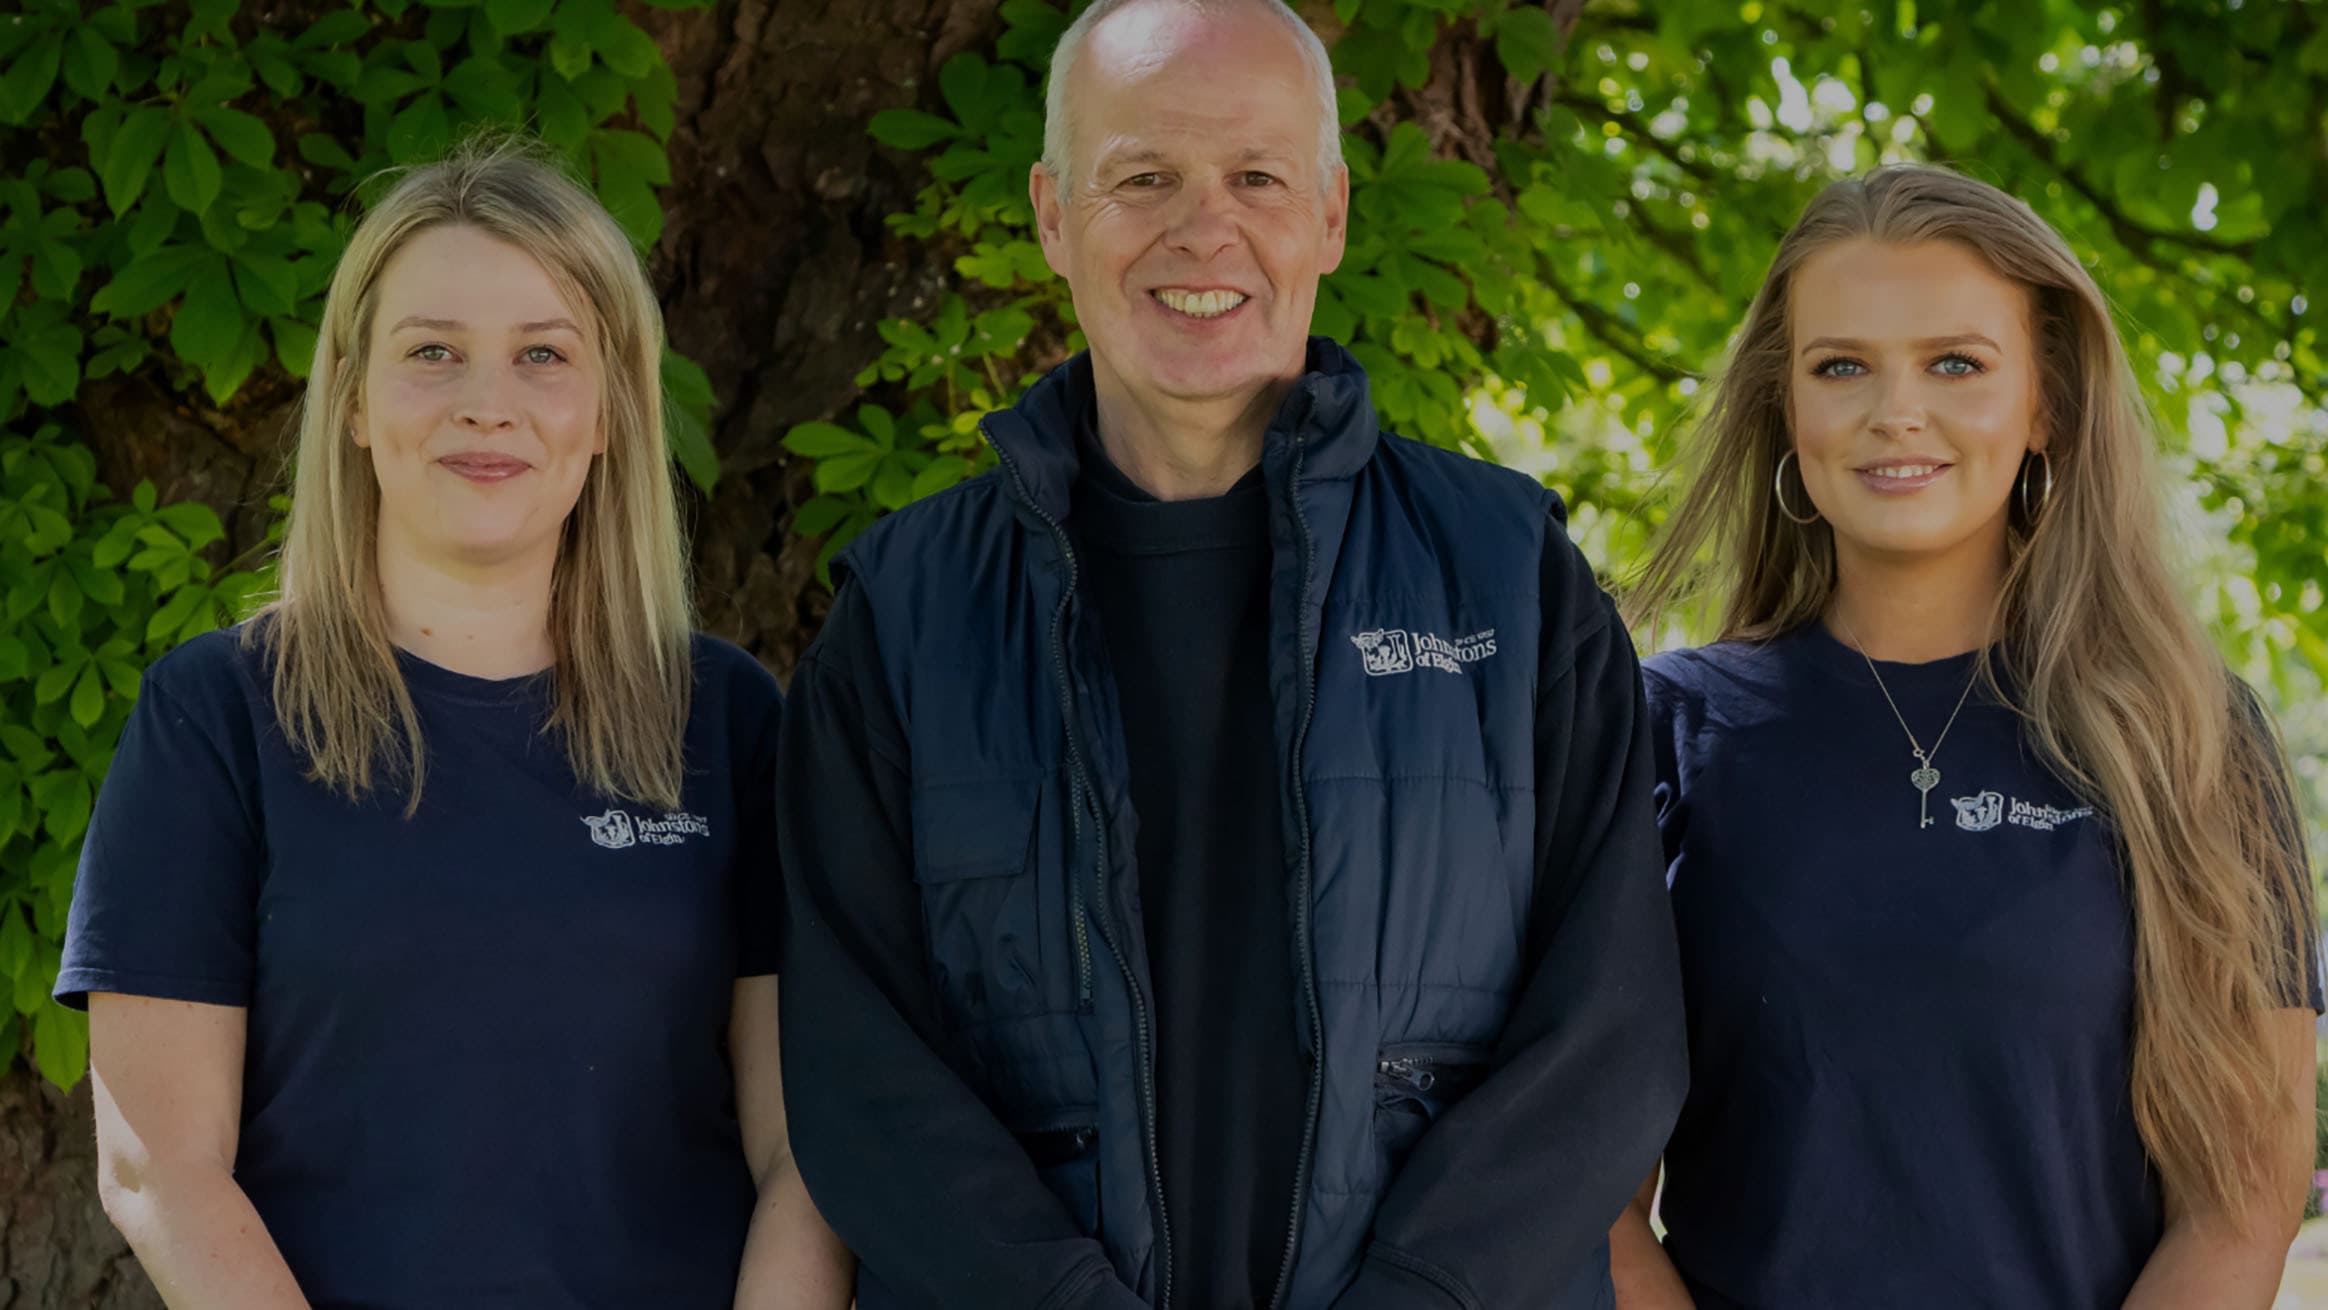 Mike Mathieson and his daughters all in Johnstons of Elgin uniform in front of a chestnut tree